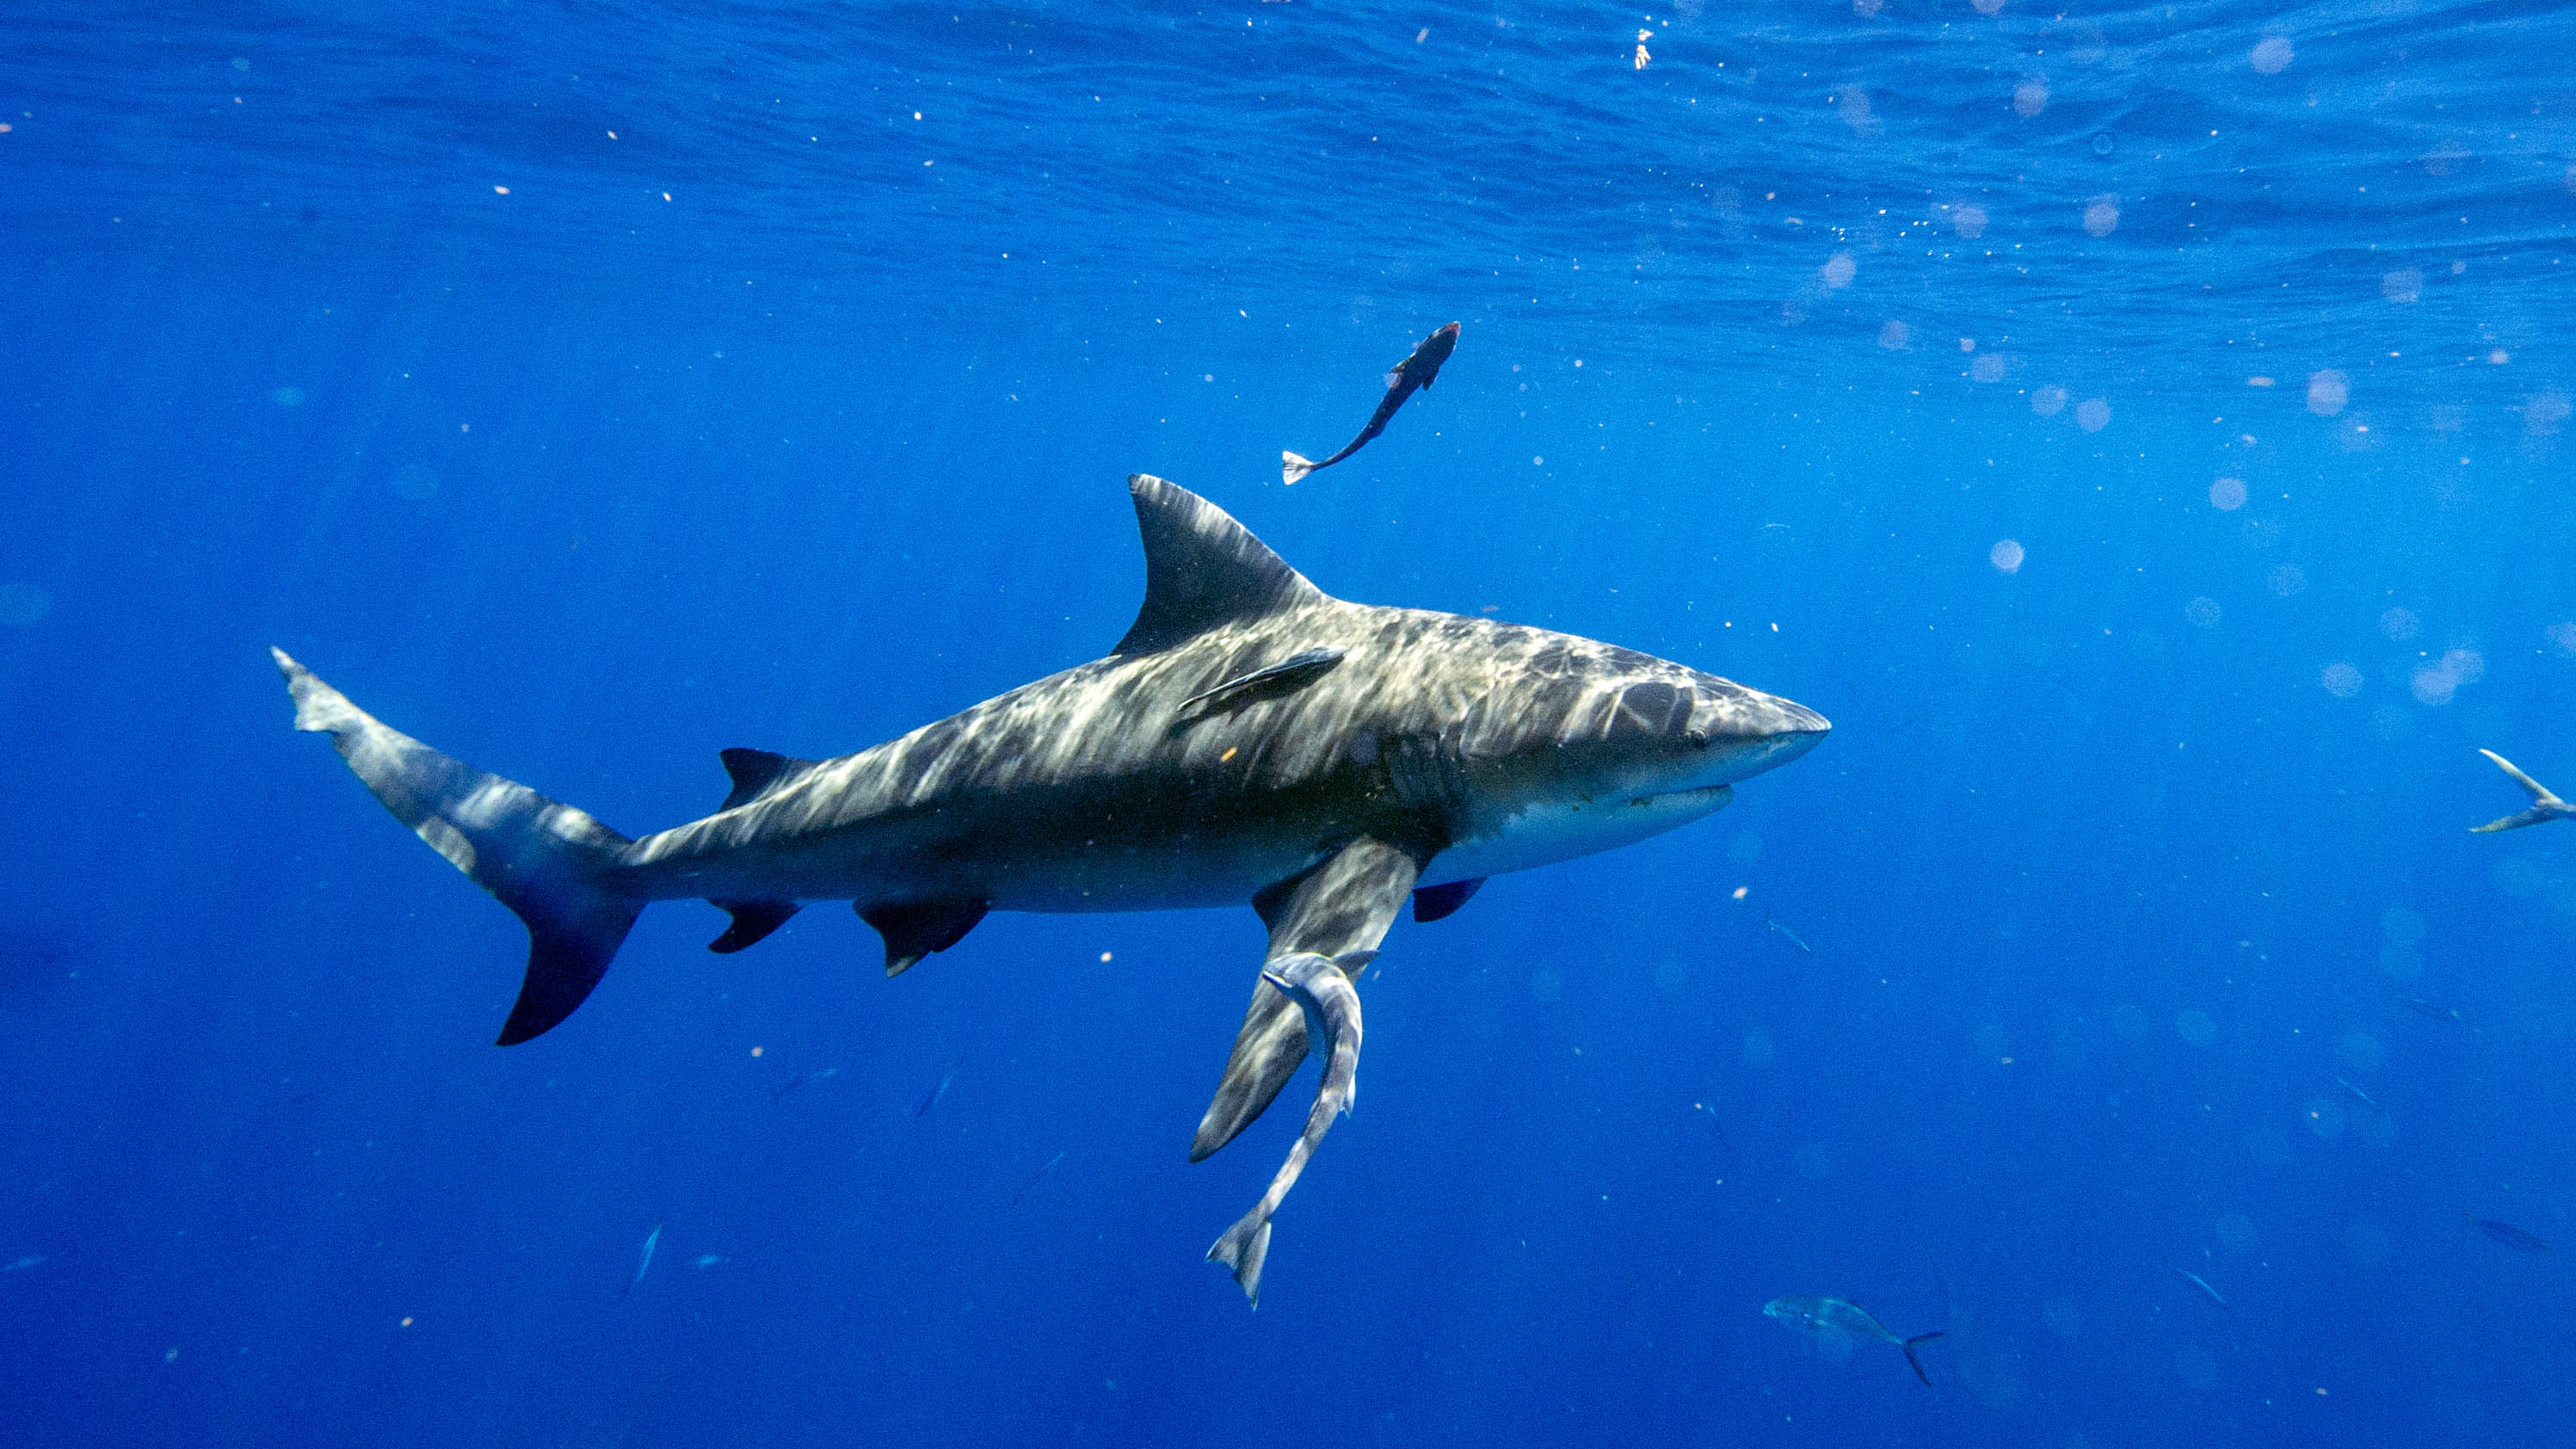 Shark Facts: Attack Stats, Record Swims, More